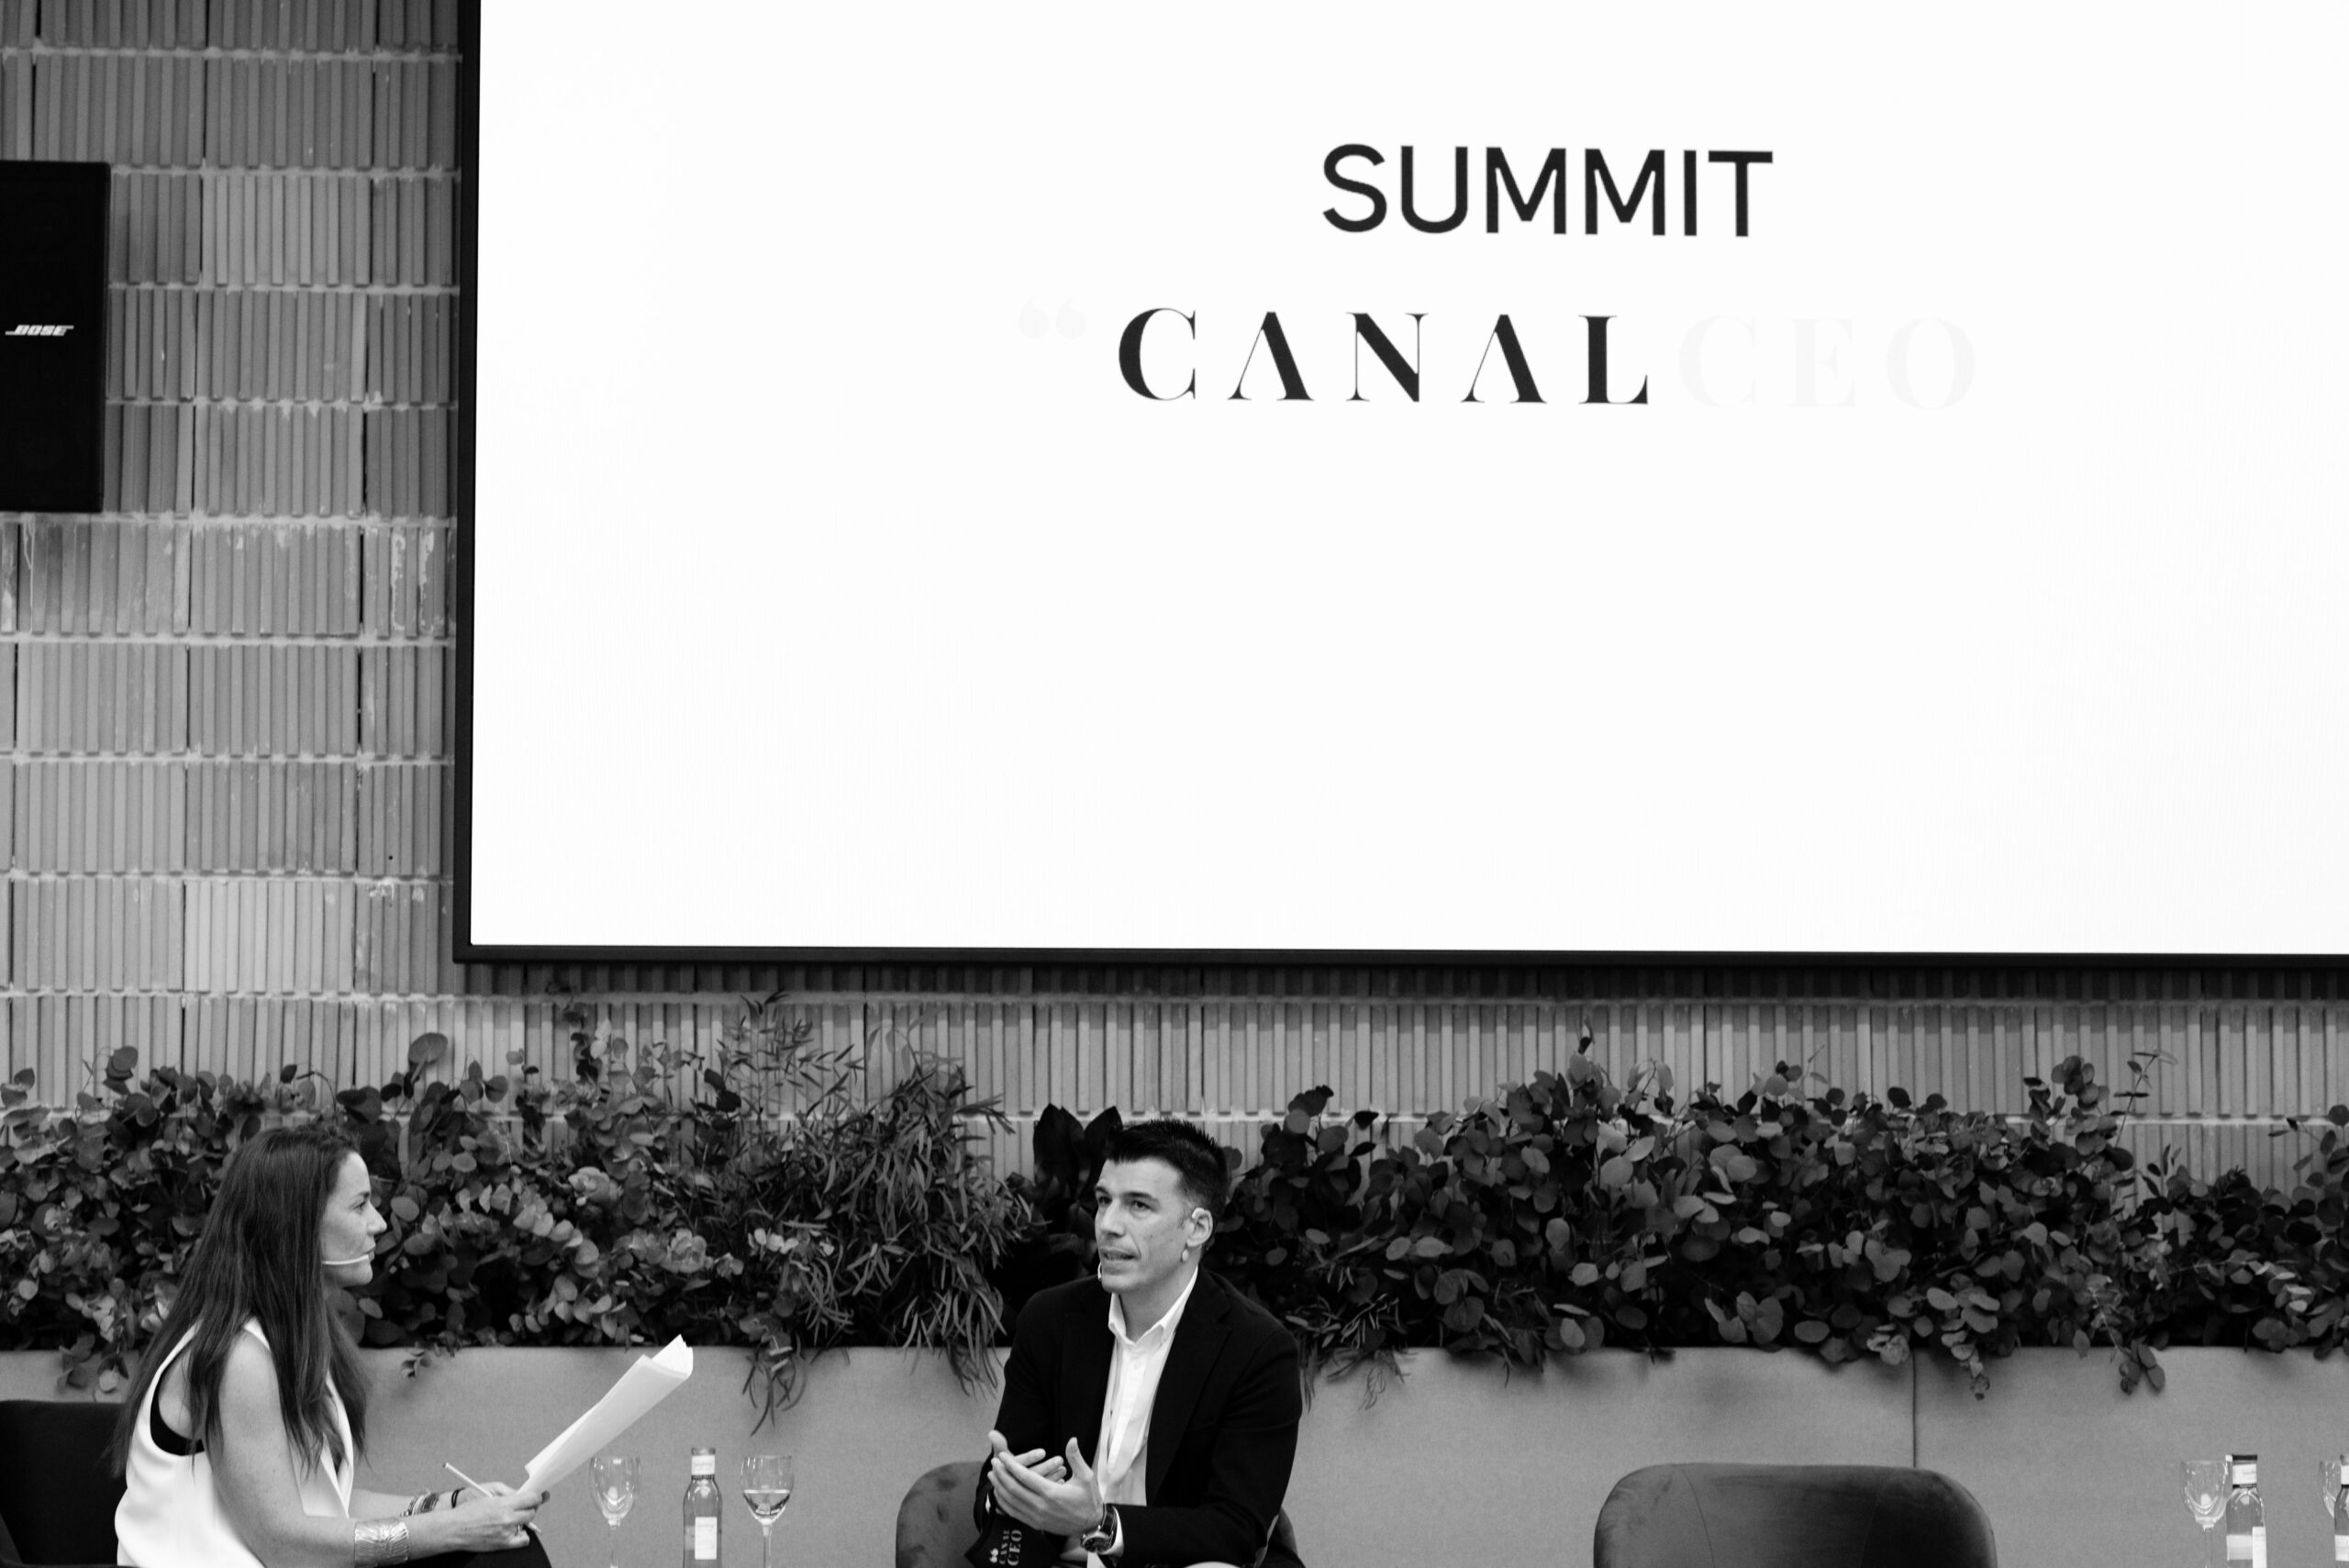 Summit Canal CEO